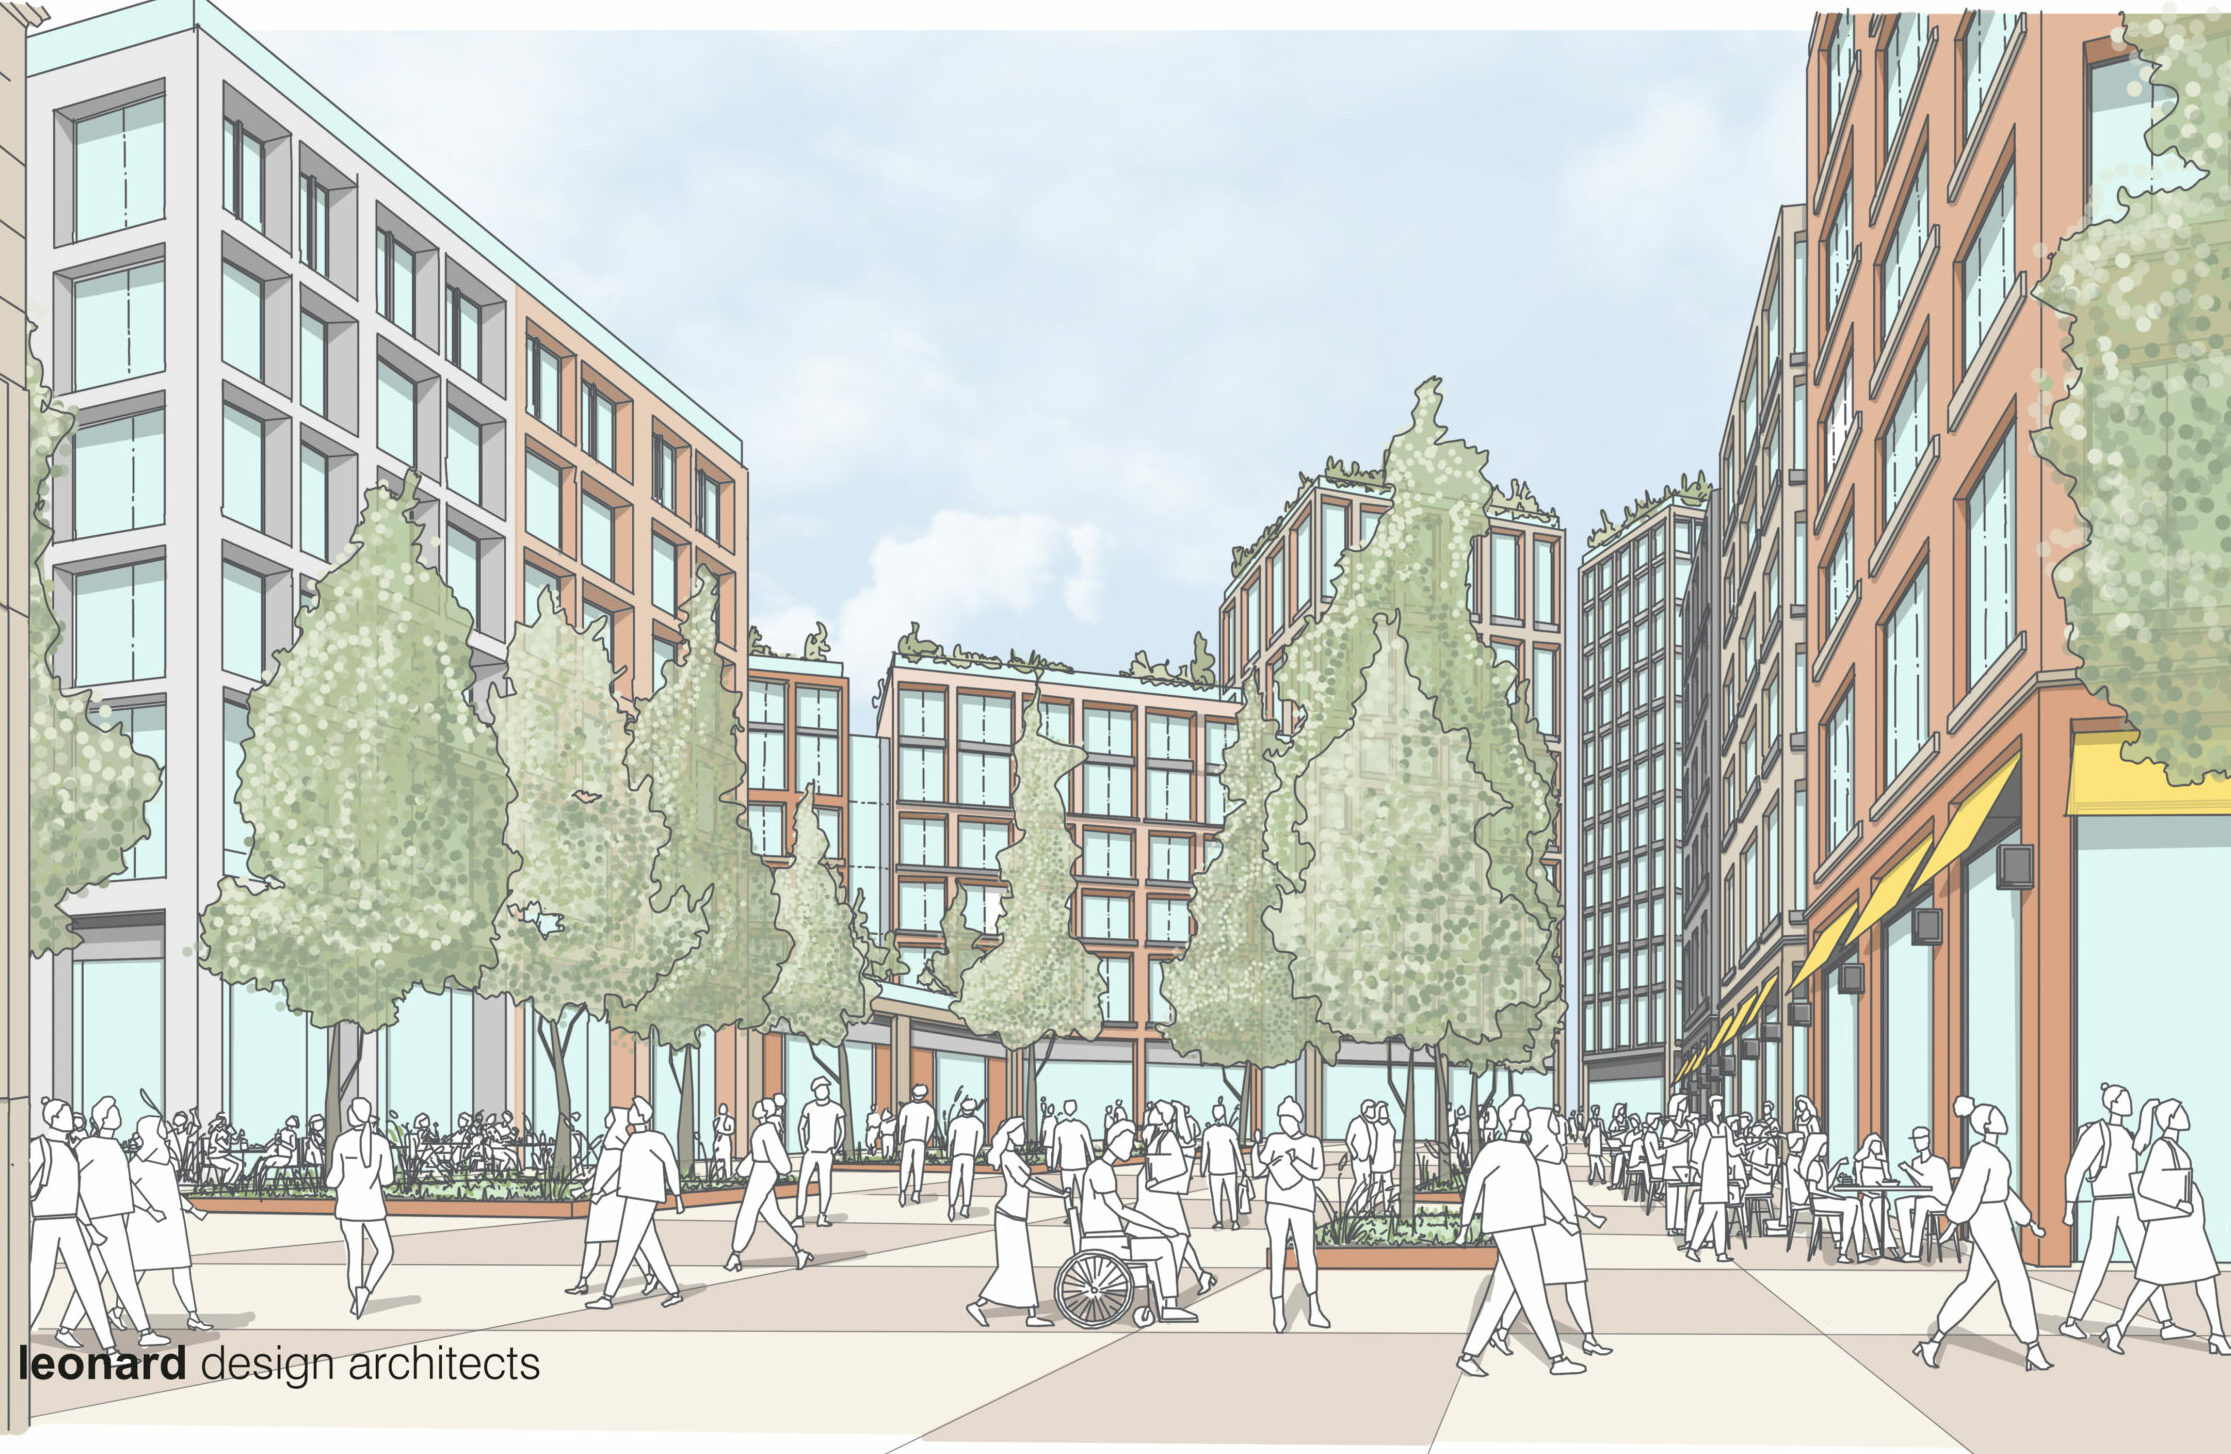 WMCA backs ambitious mixed use plans for Gracechurch, Sutton Coldfield